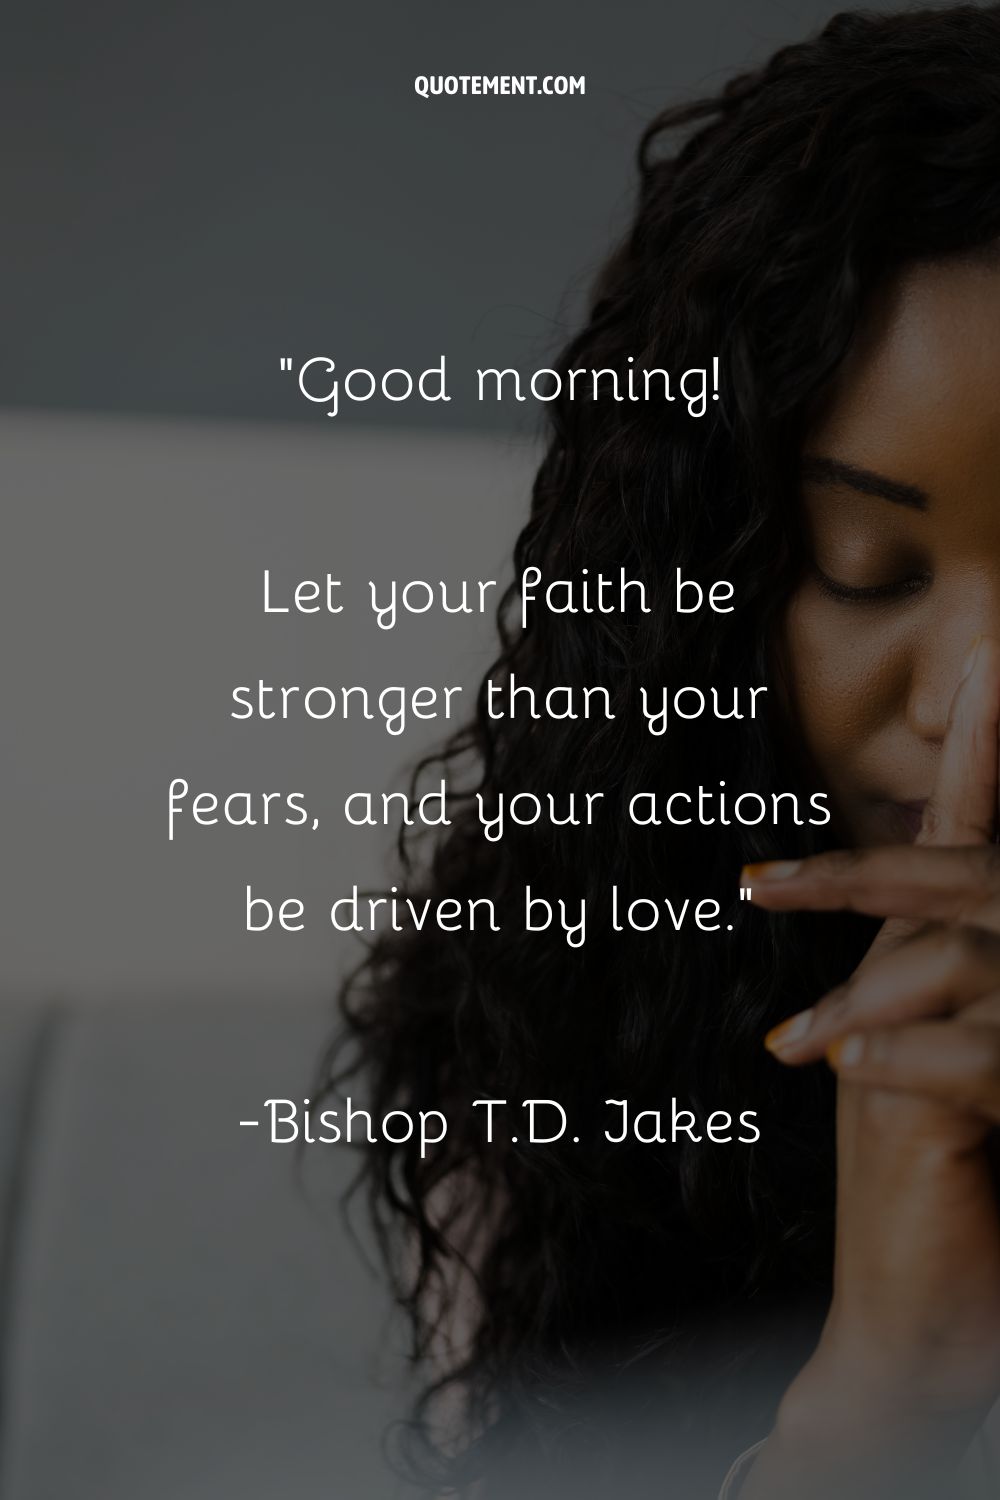 Good morning! Let your faith be stronger than your fears, and your actions be driven by love.